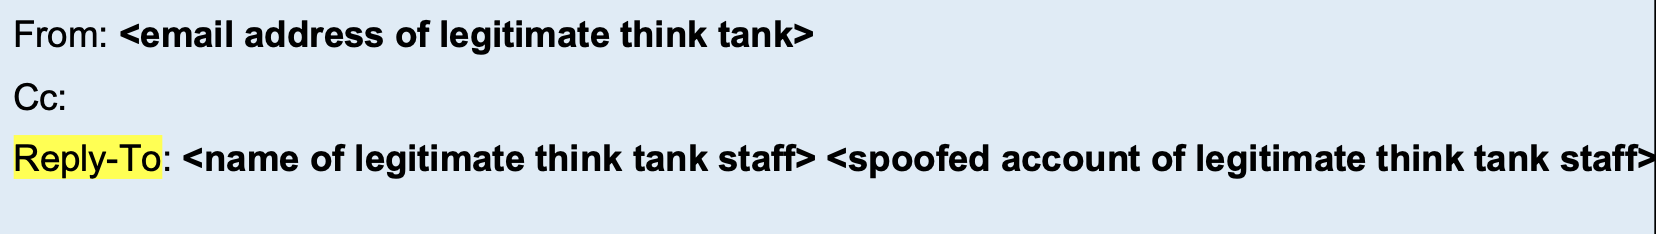 ThinkTank Email Header showing Reply-To info.